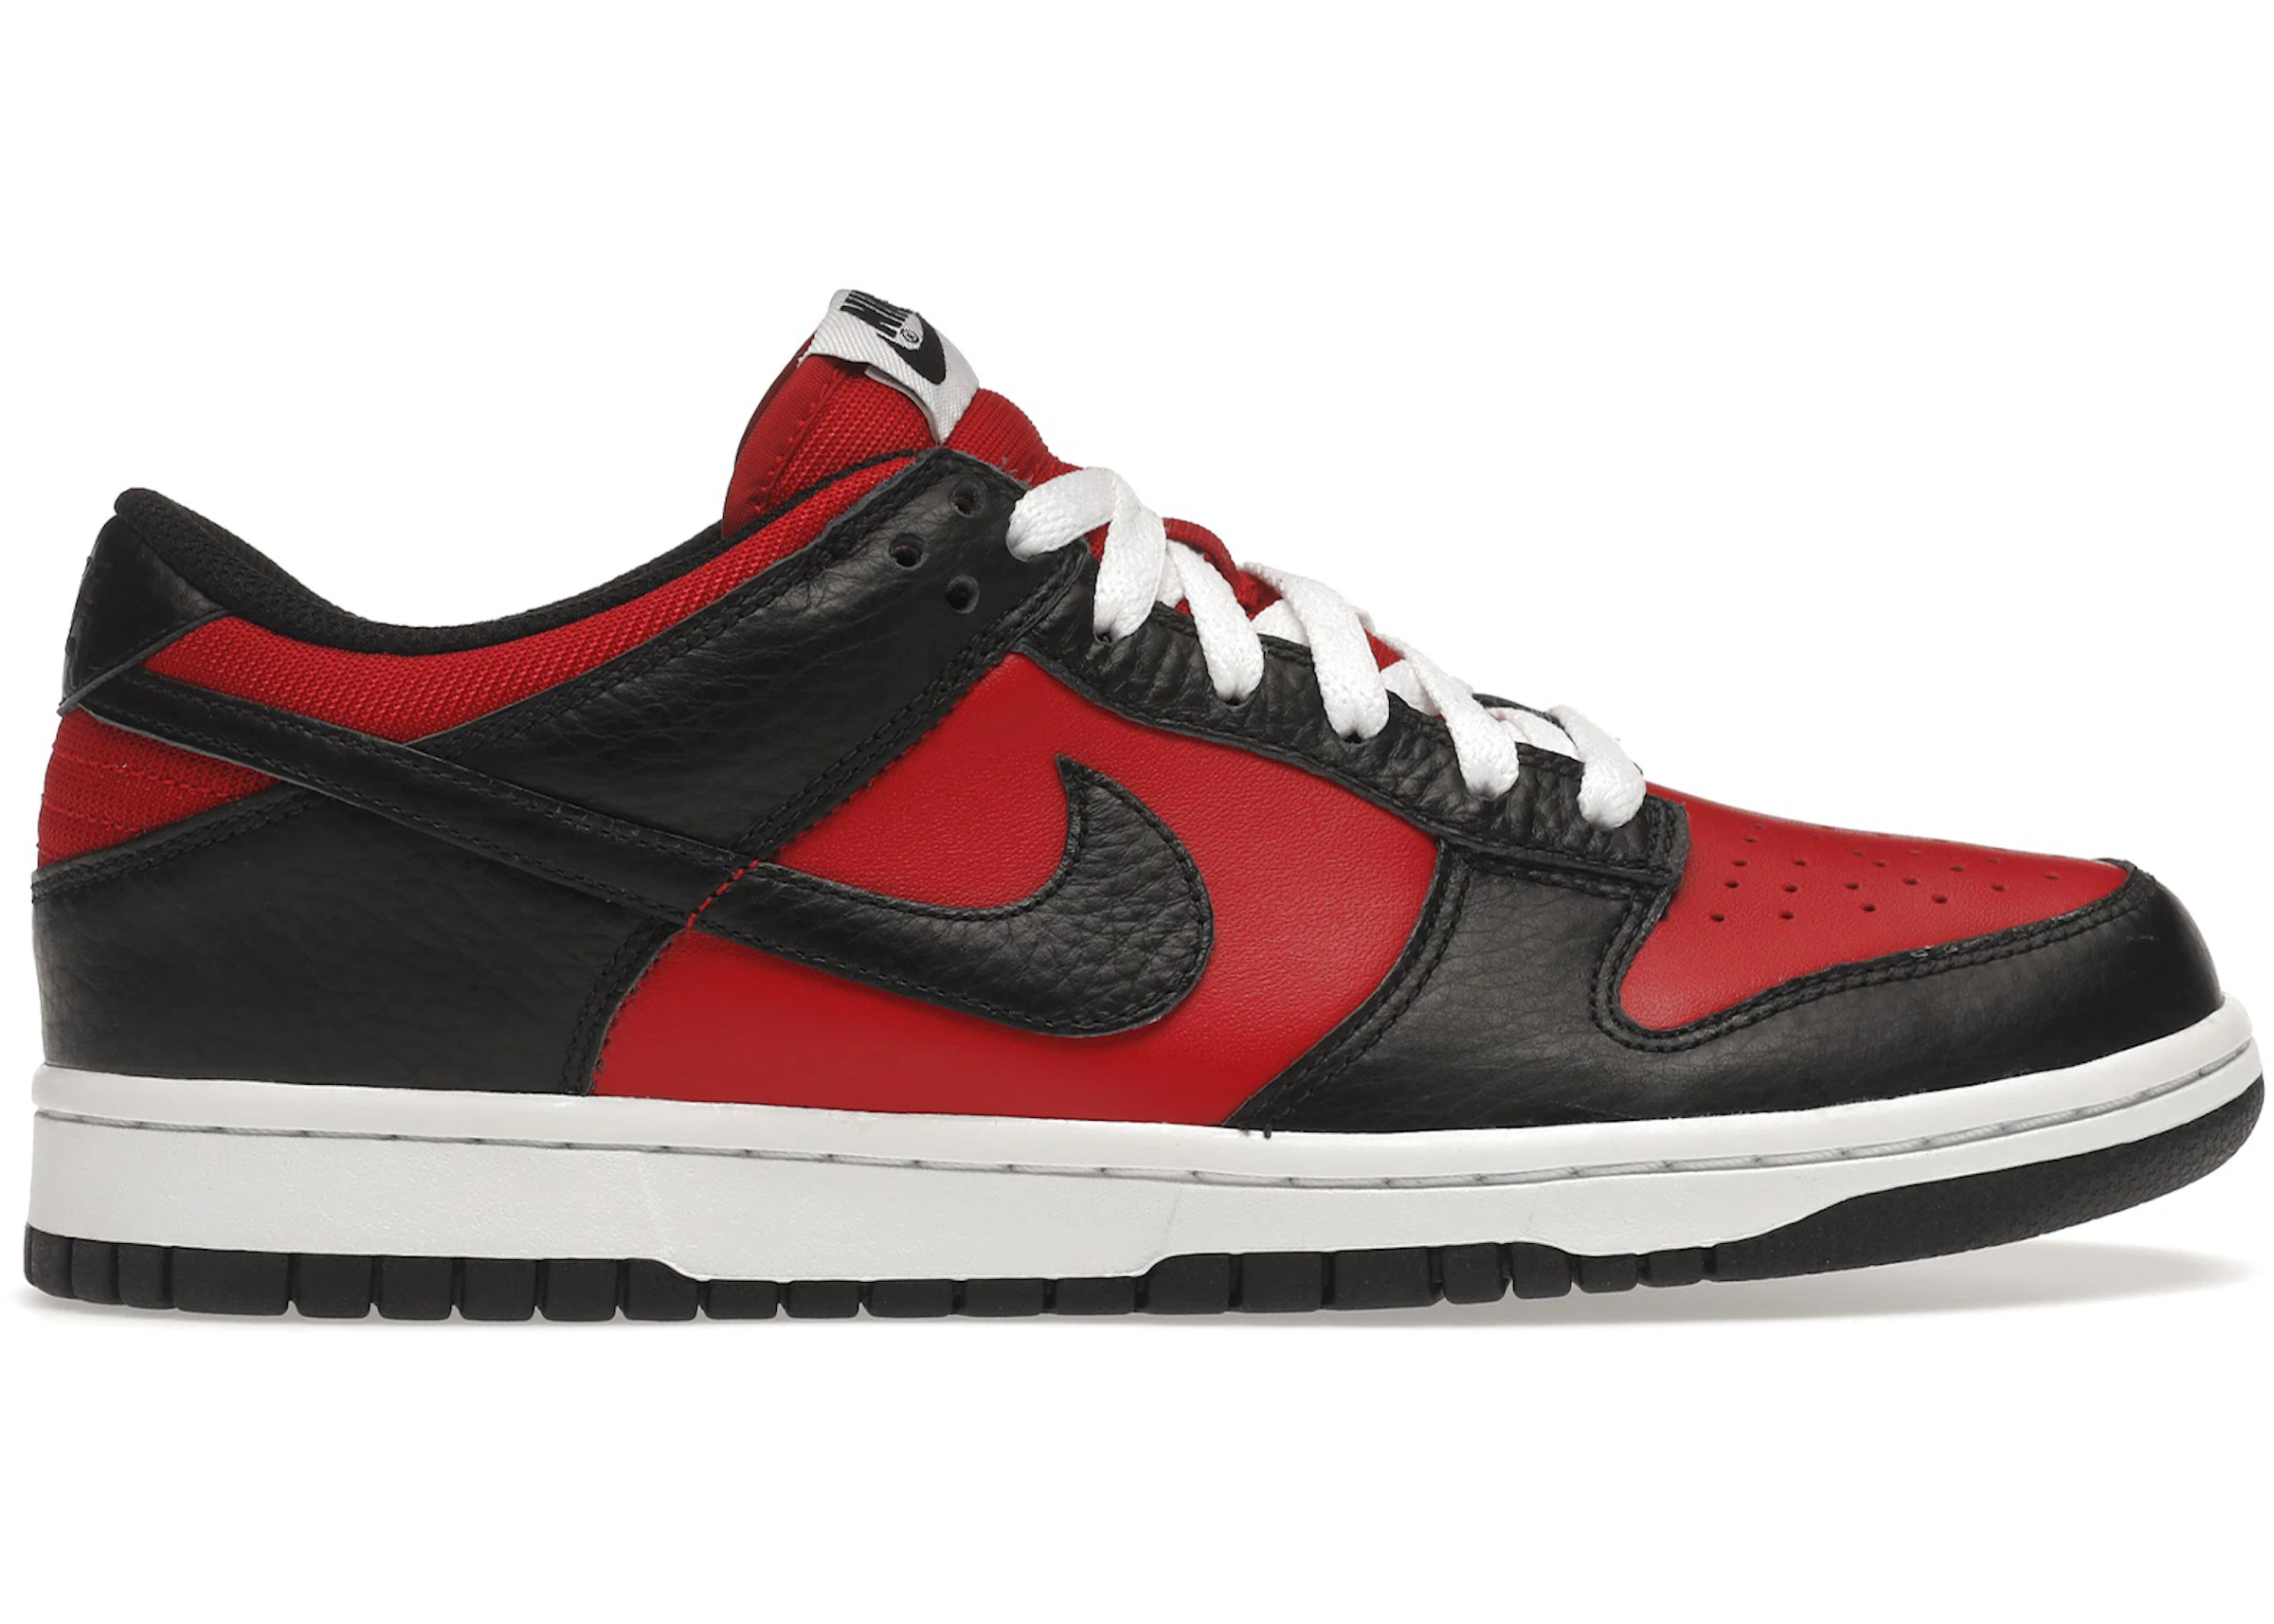 Nike Dunk Red And Black: Bold And Eye-Catching Sneakers In Red And ...